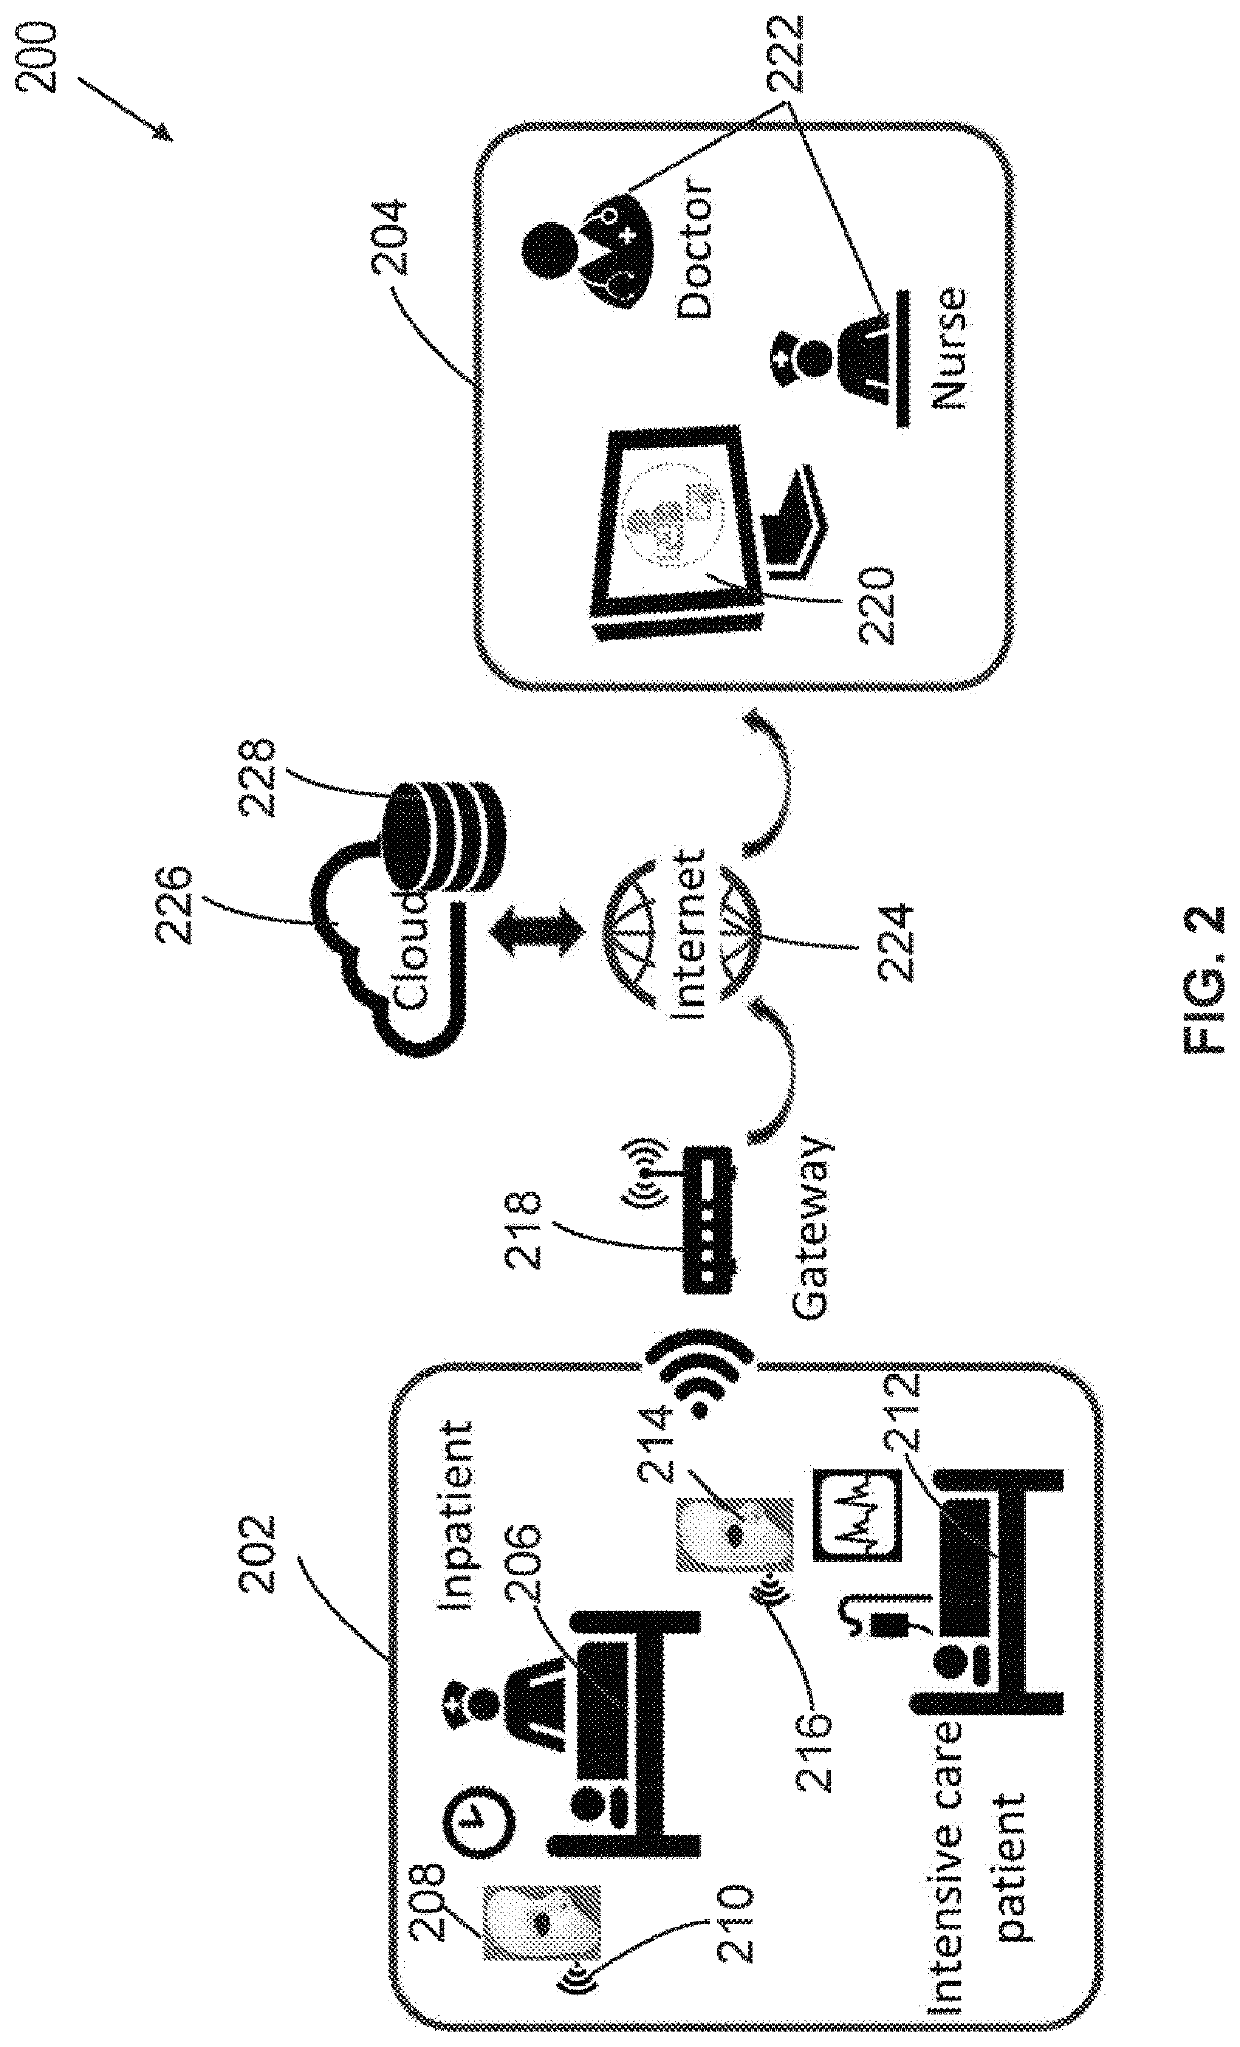 Pain assessment method and apparatus for patients unable to self-report pain